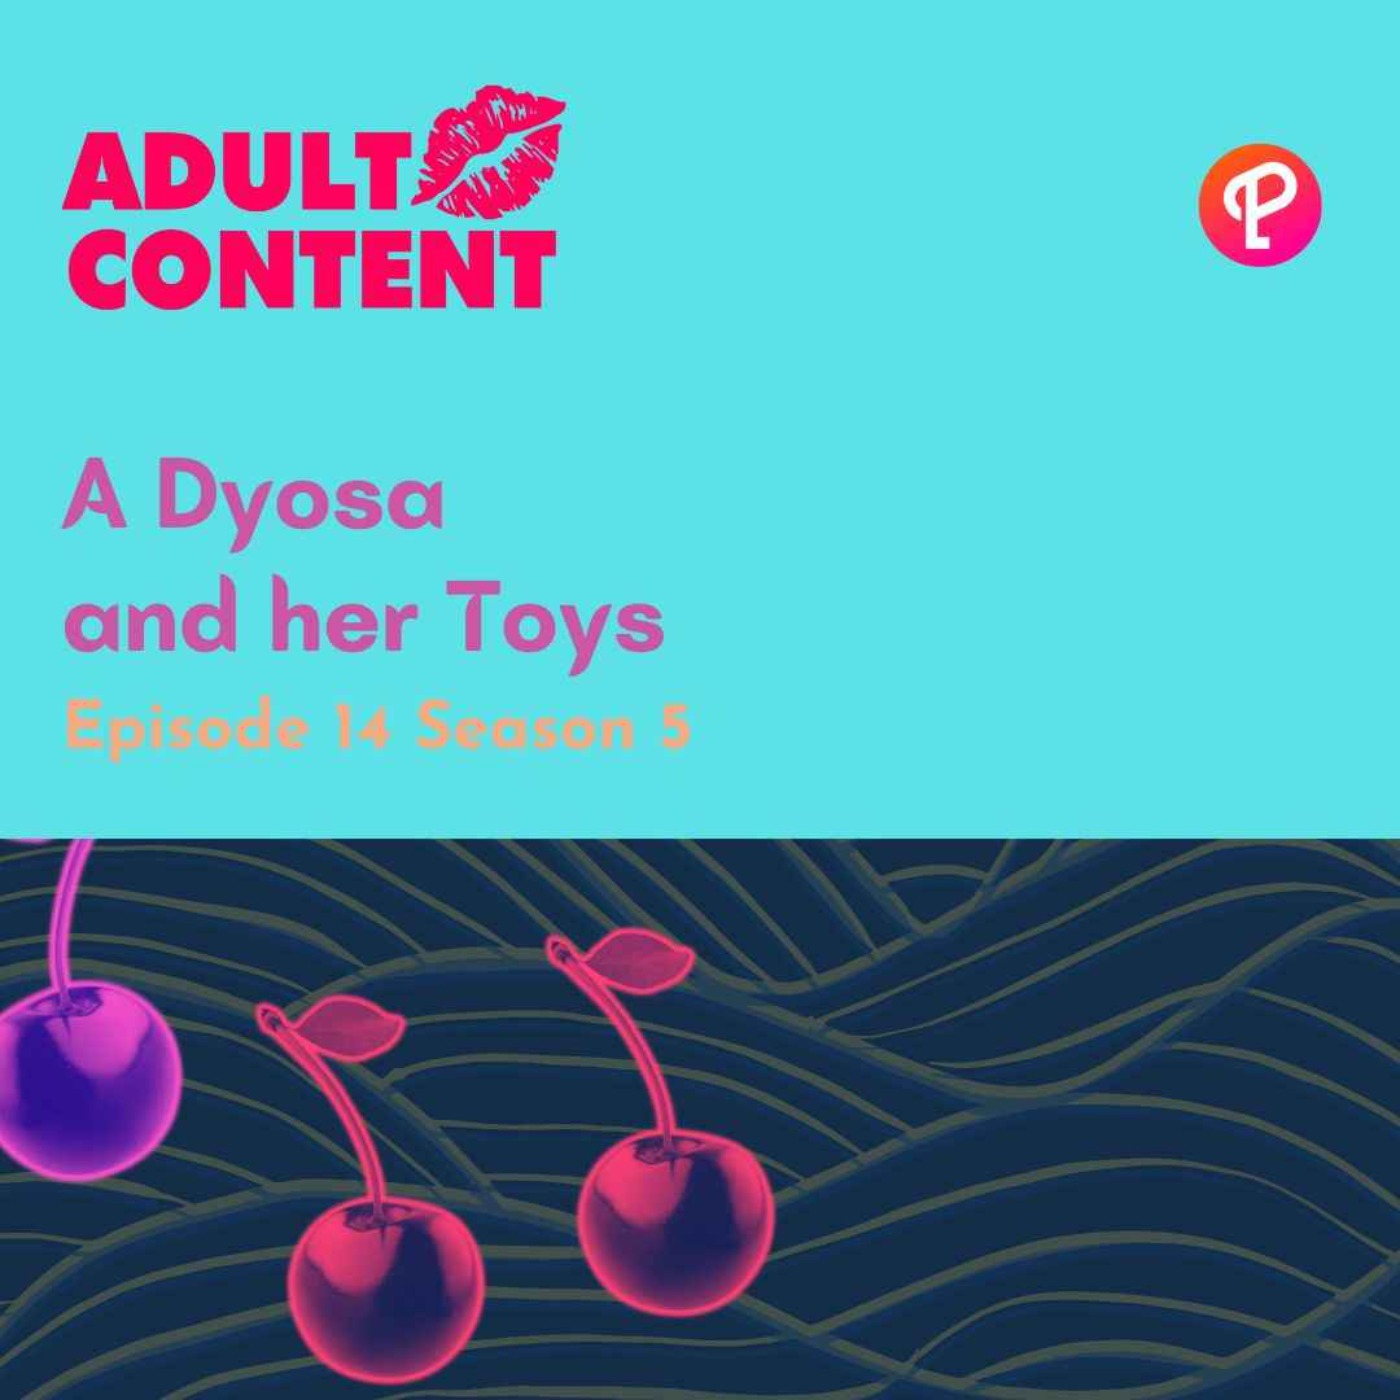 EP14 S5:  A Dyosa and her Toys